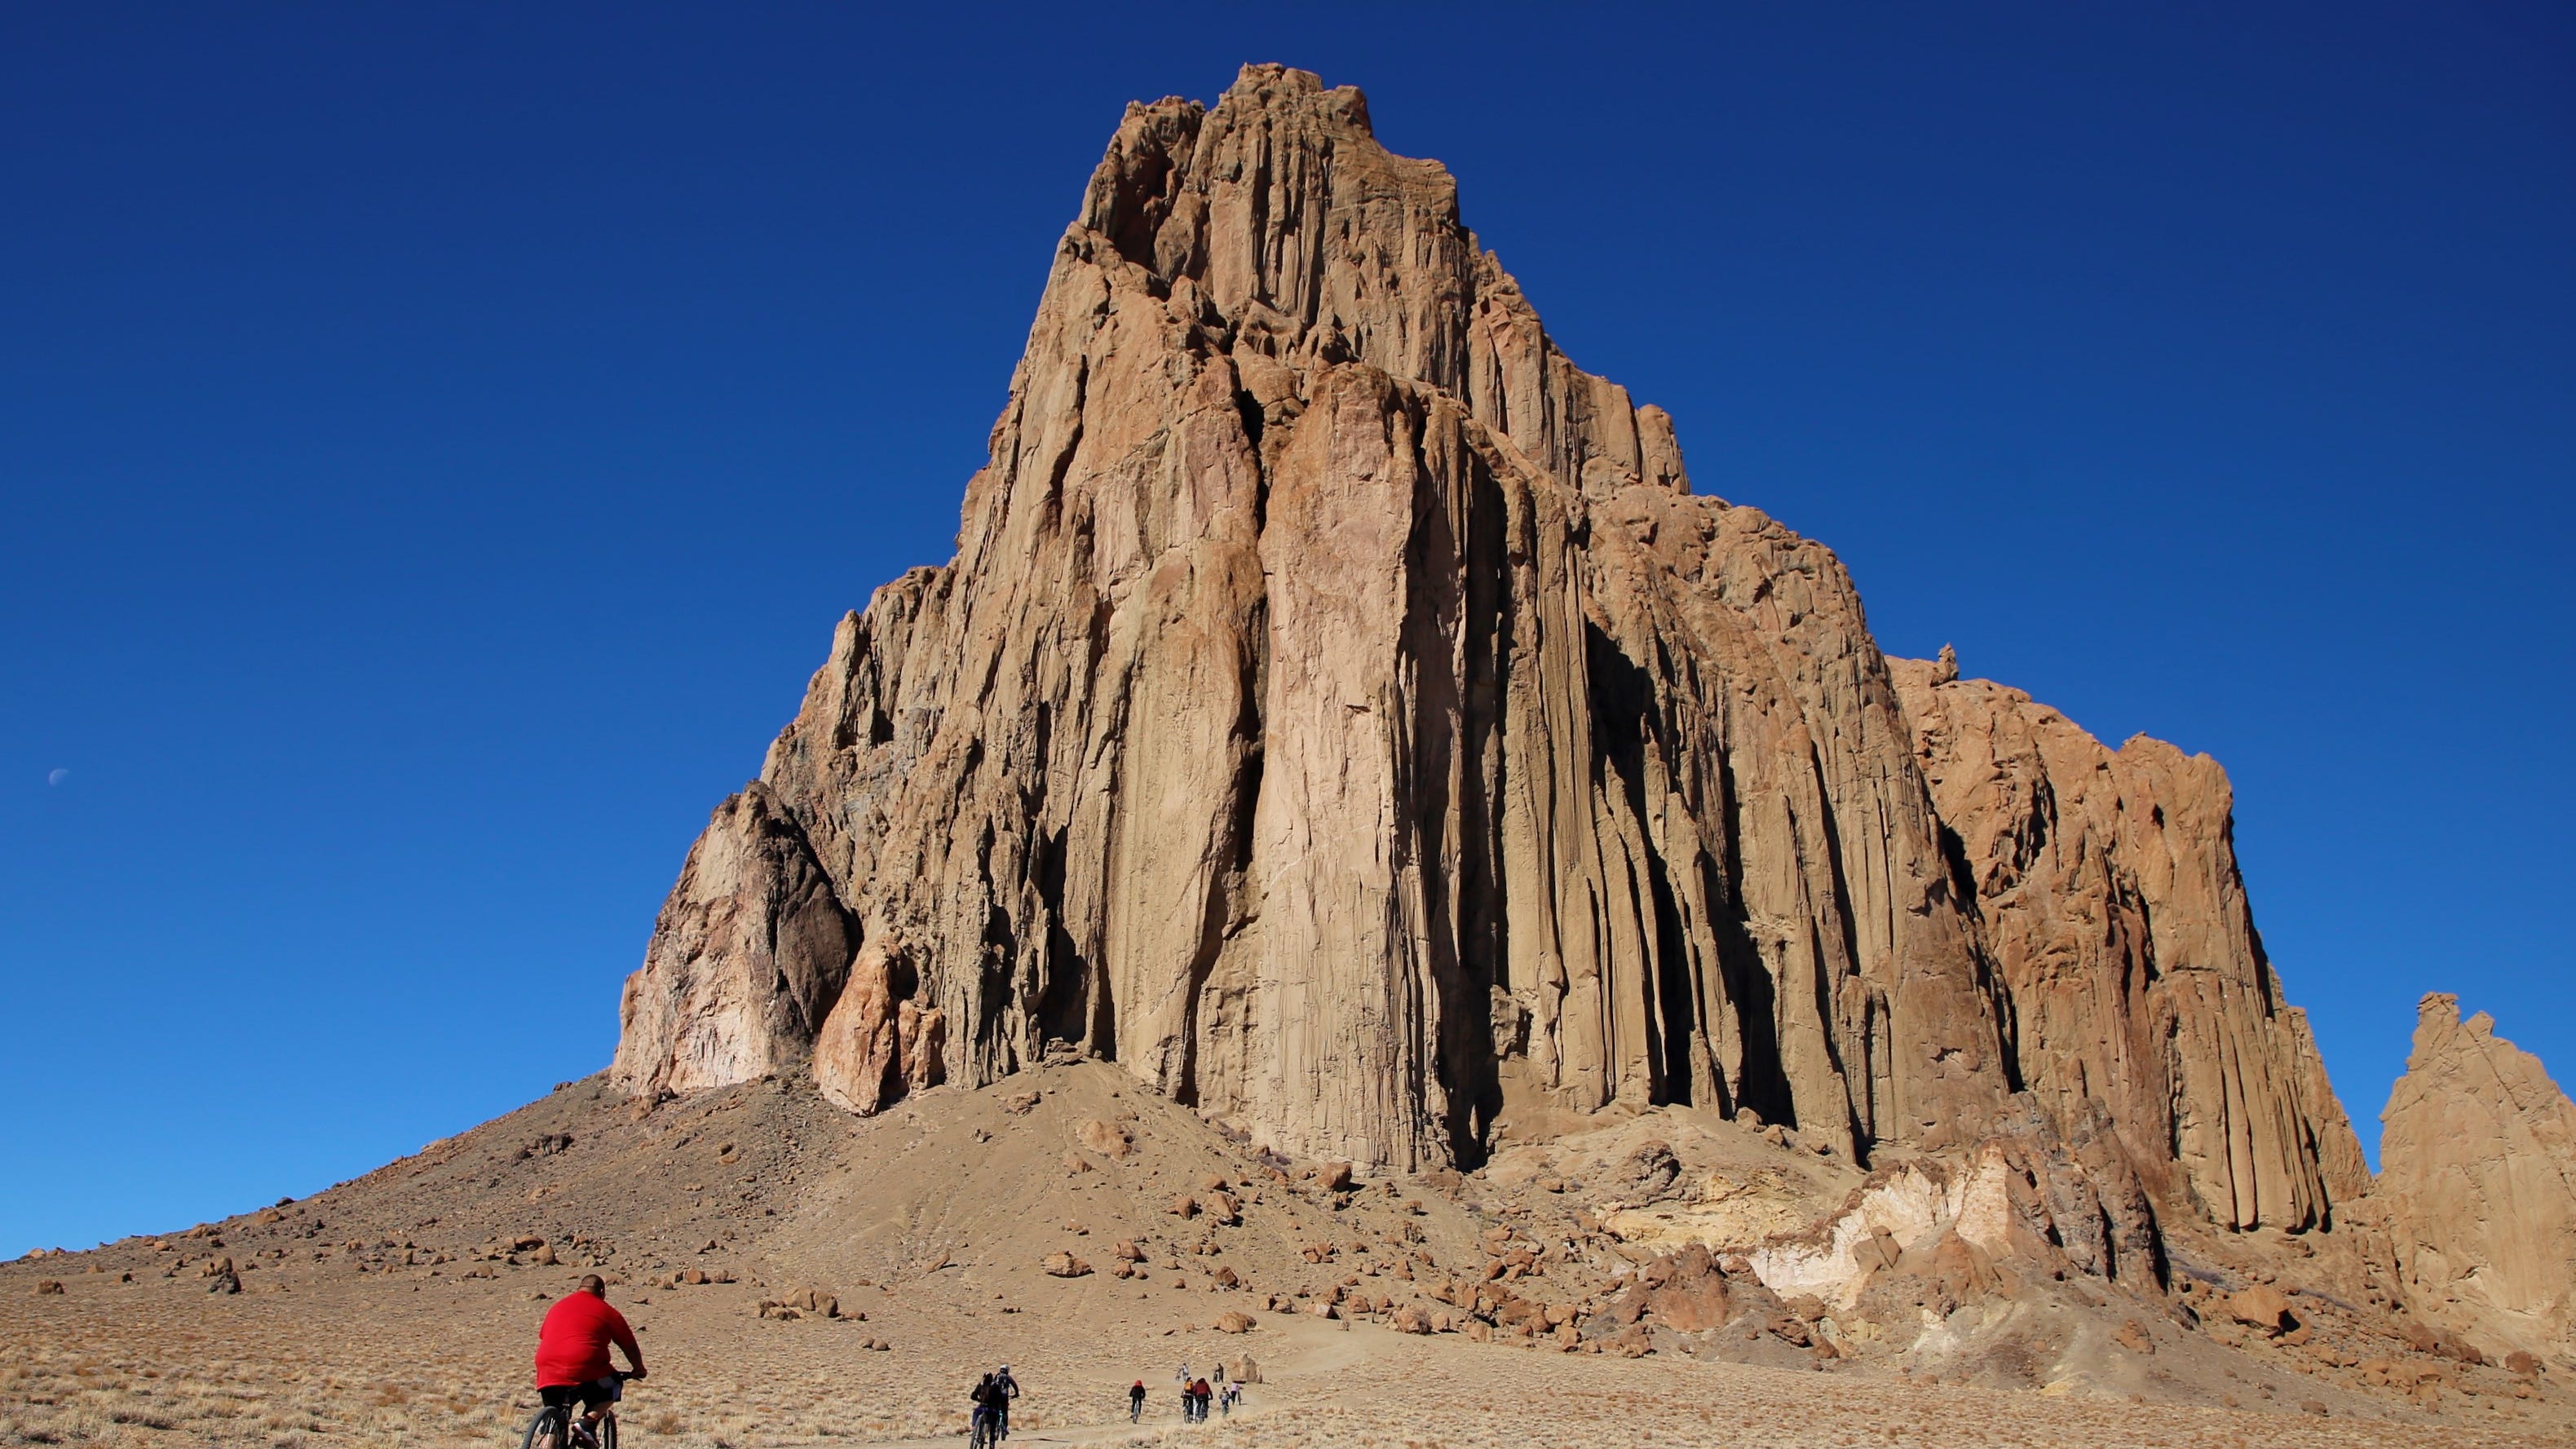 Annual Ride To The Rock event takes place Friday at Shiprock Pinnacle